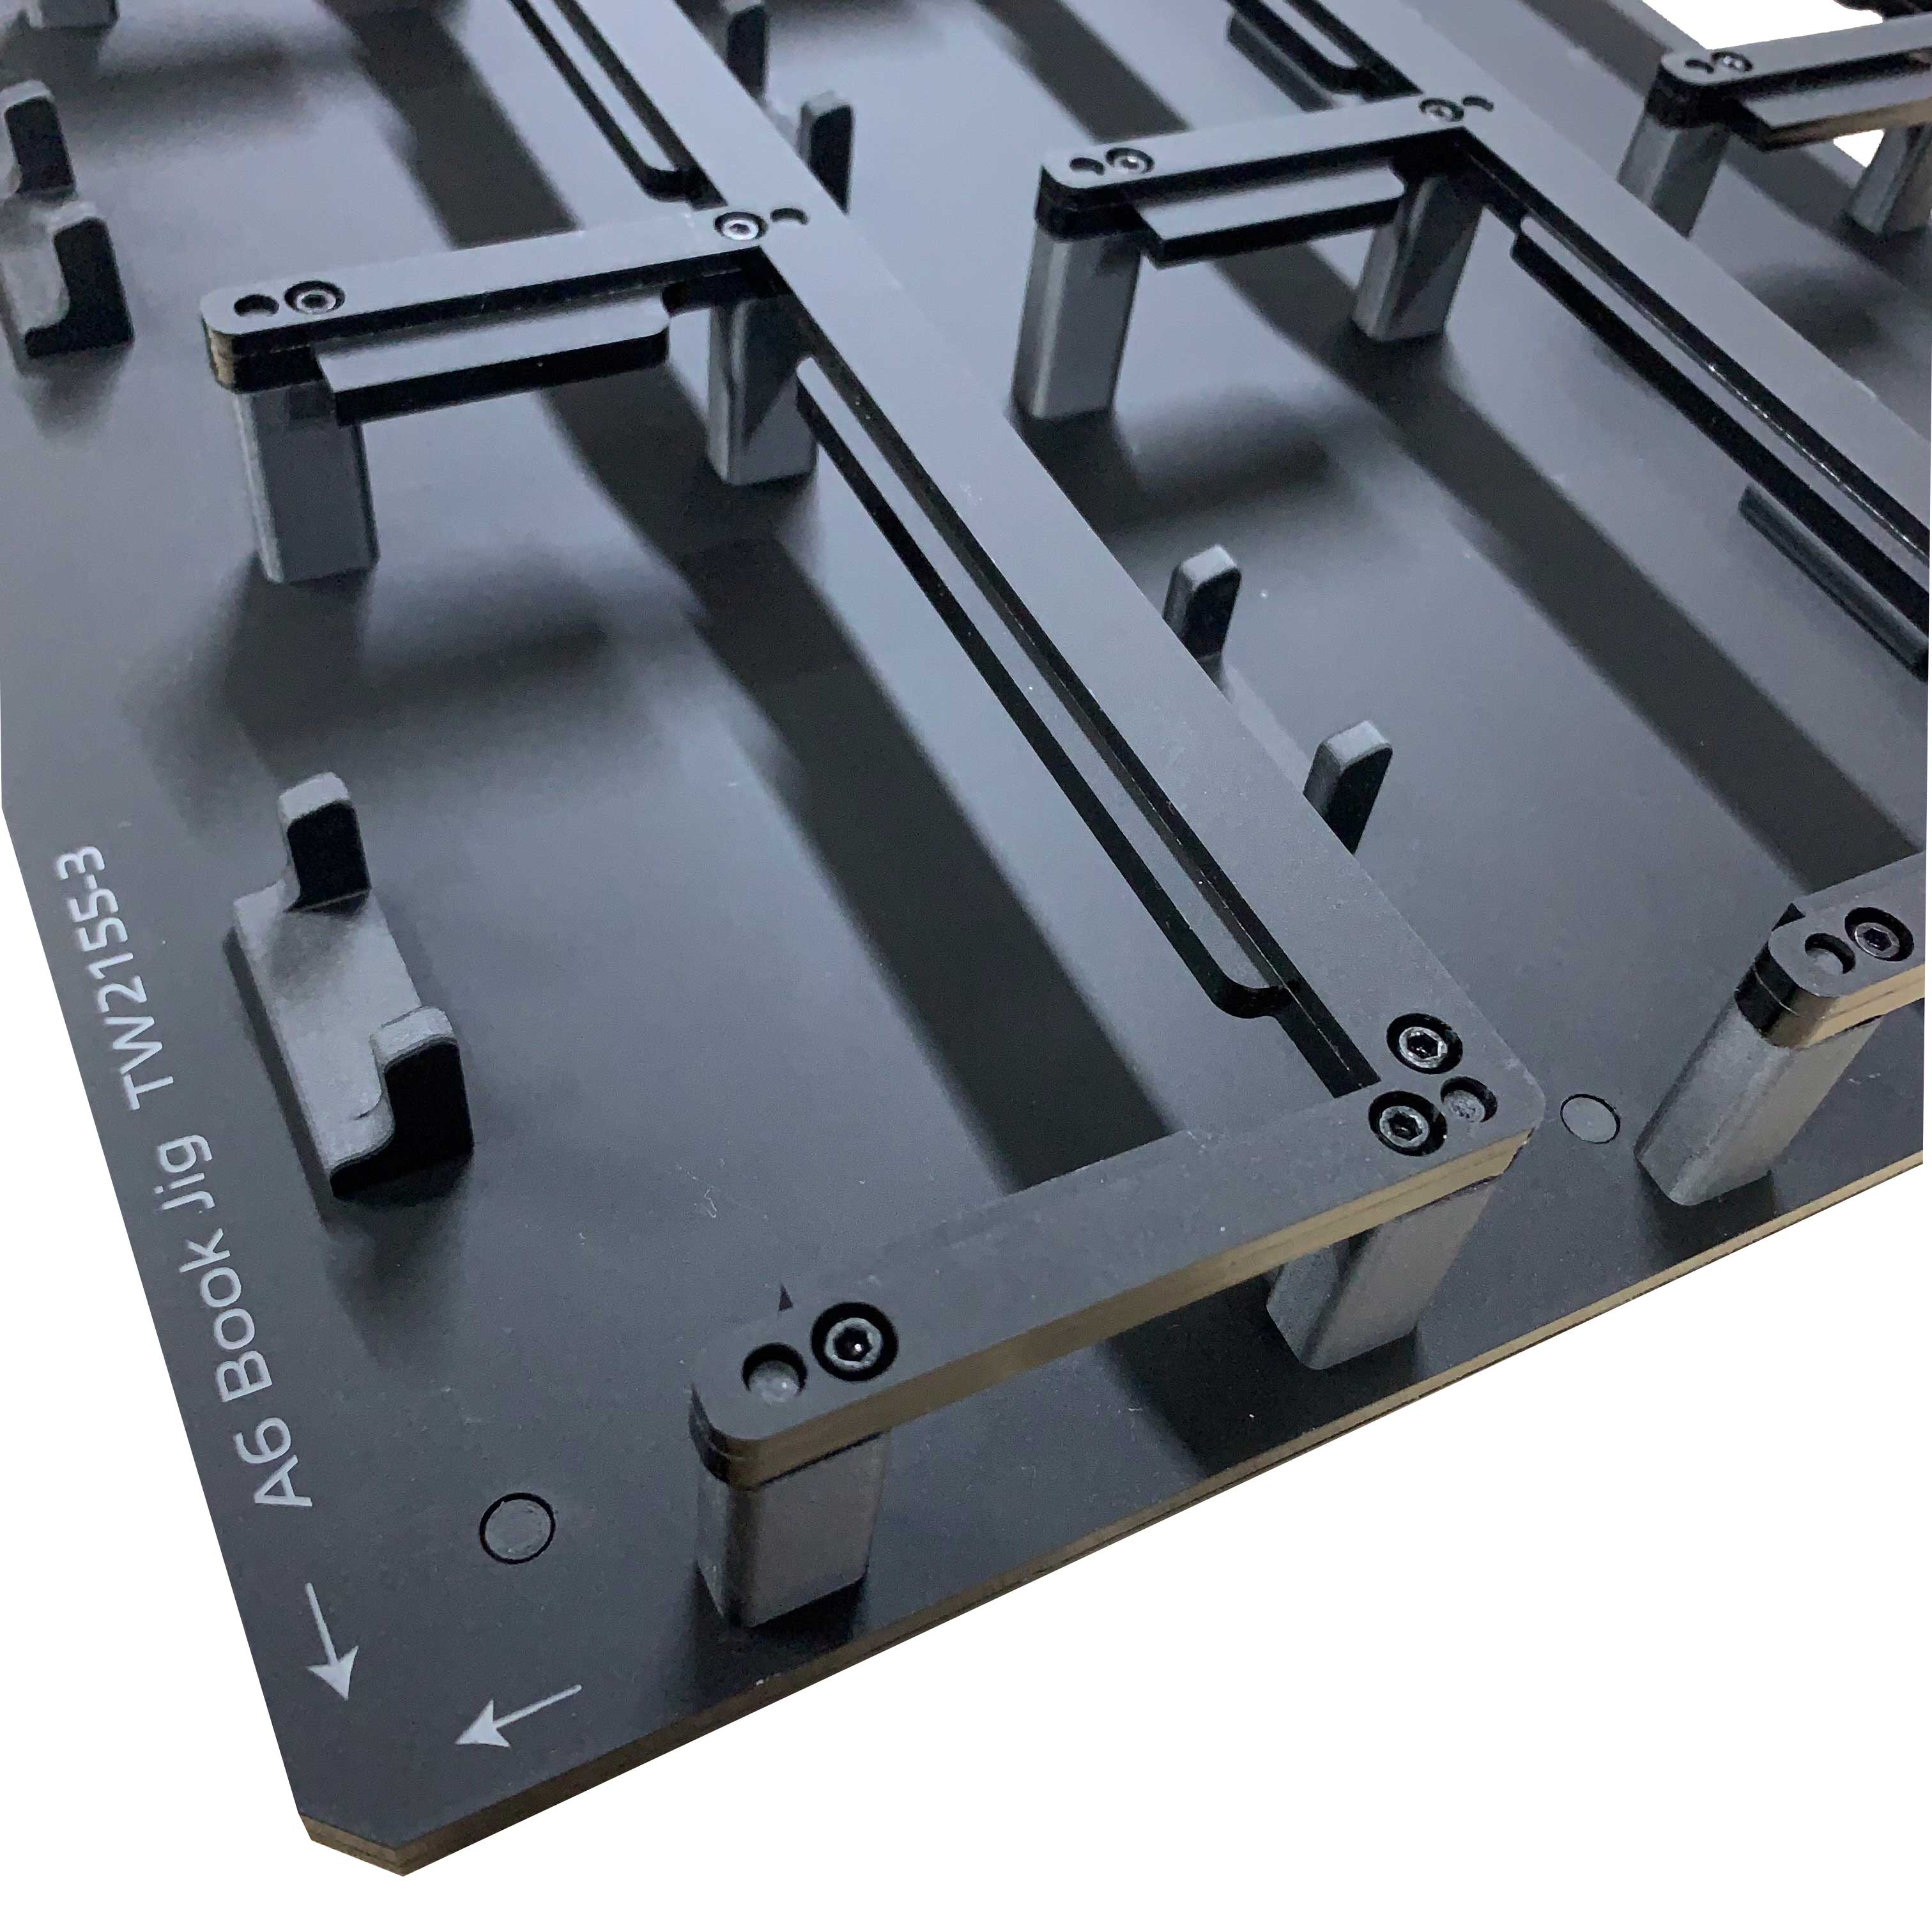 A6 Notebook Printing Jig for Mimaki UJF-6042 Flatbed Printer 10 Spaces)